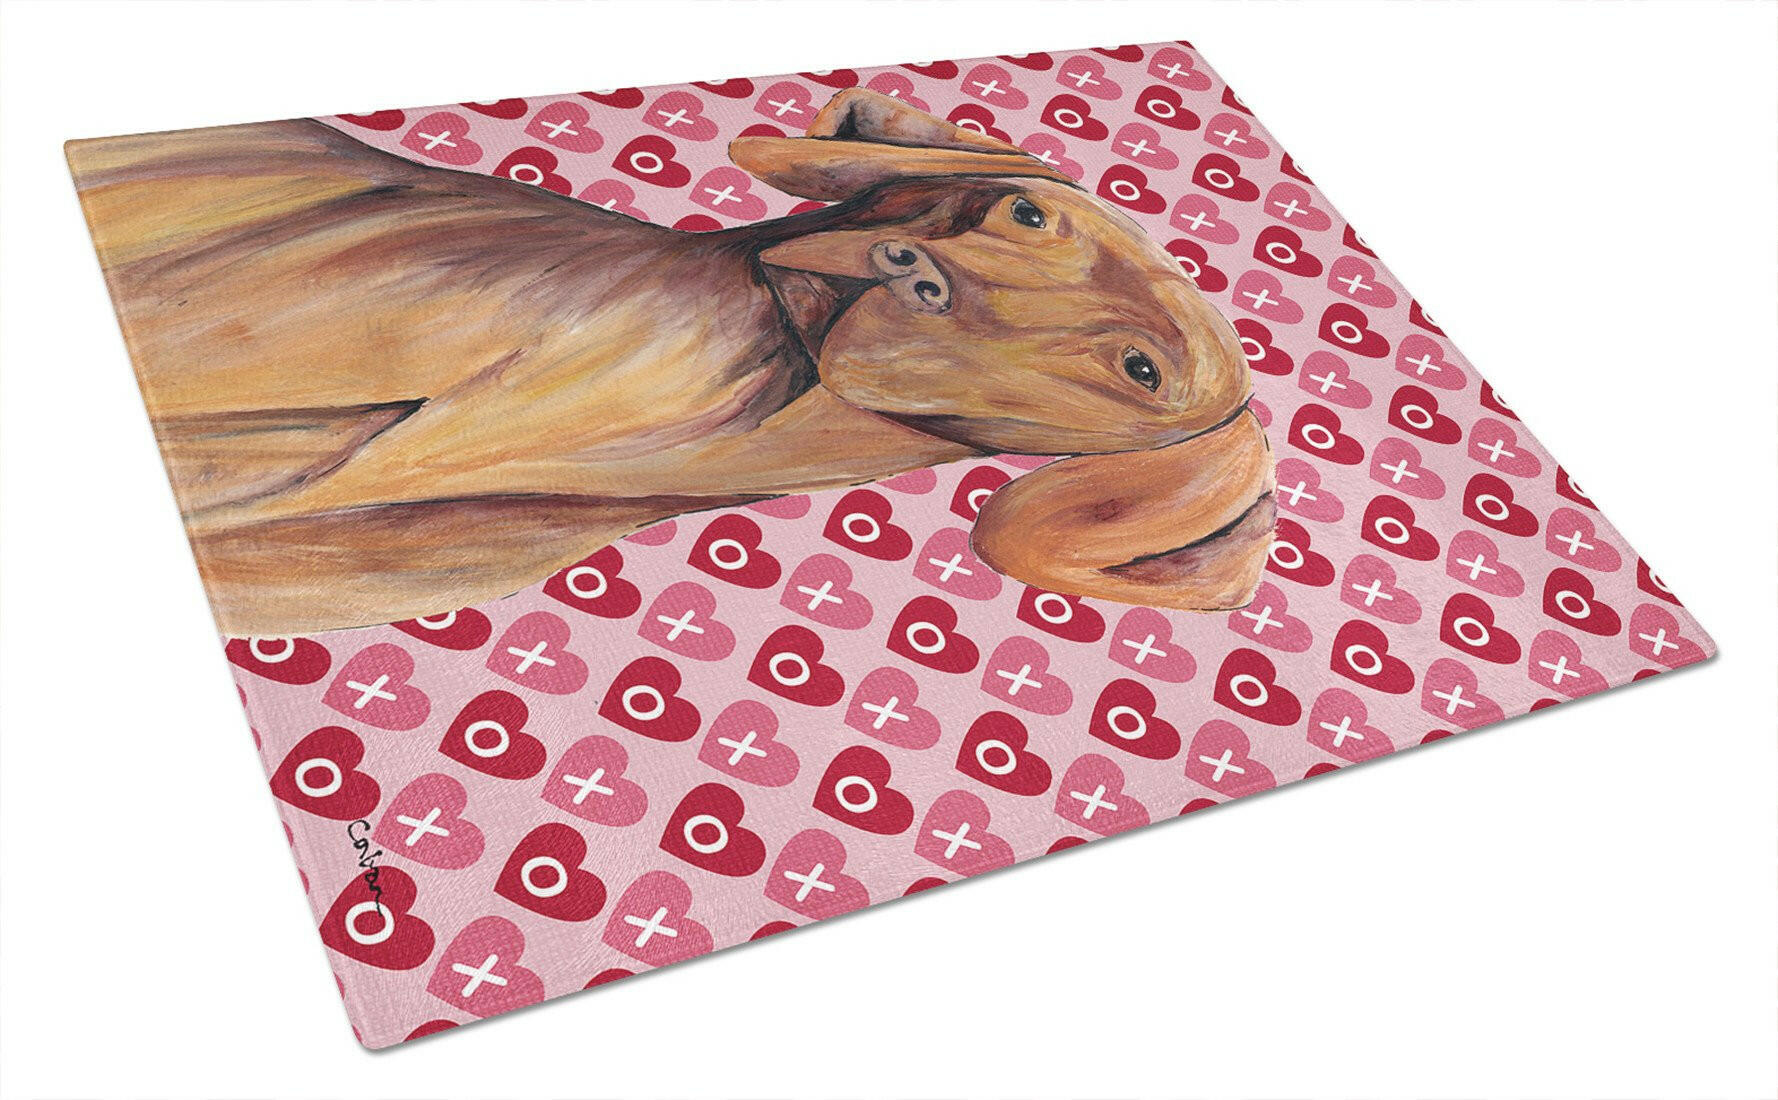 Vizsla Hearts Love and Valentine's Day Portrait Glass Cutting Board Large by Caroline's Treasures